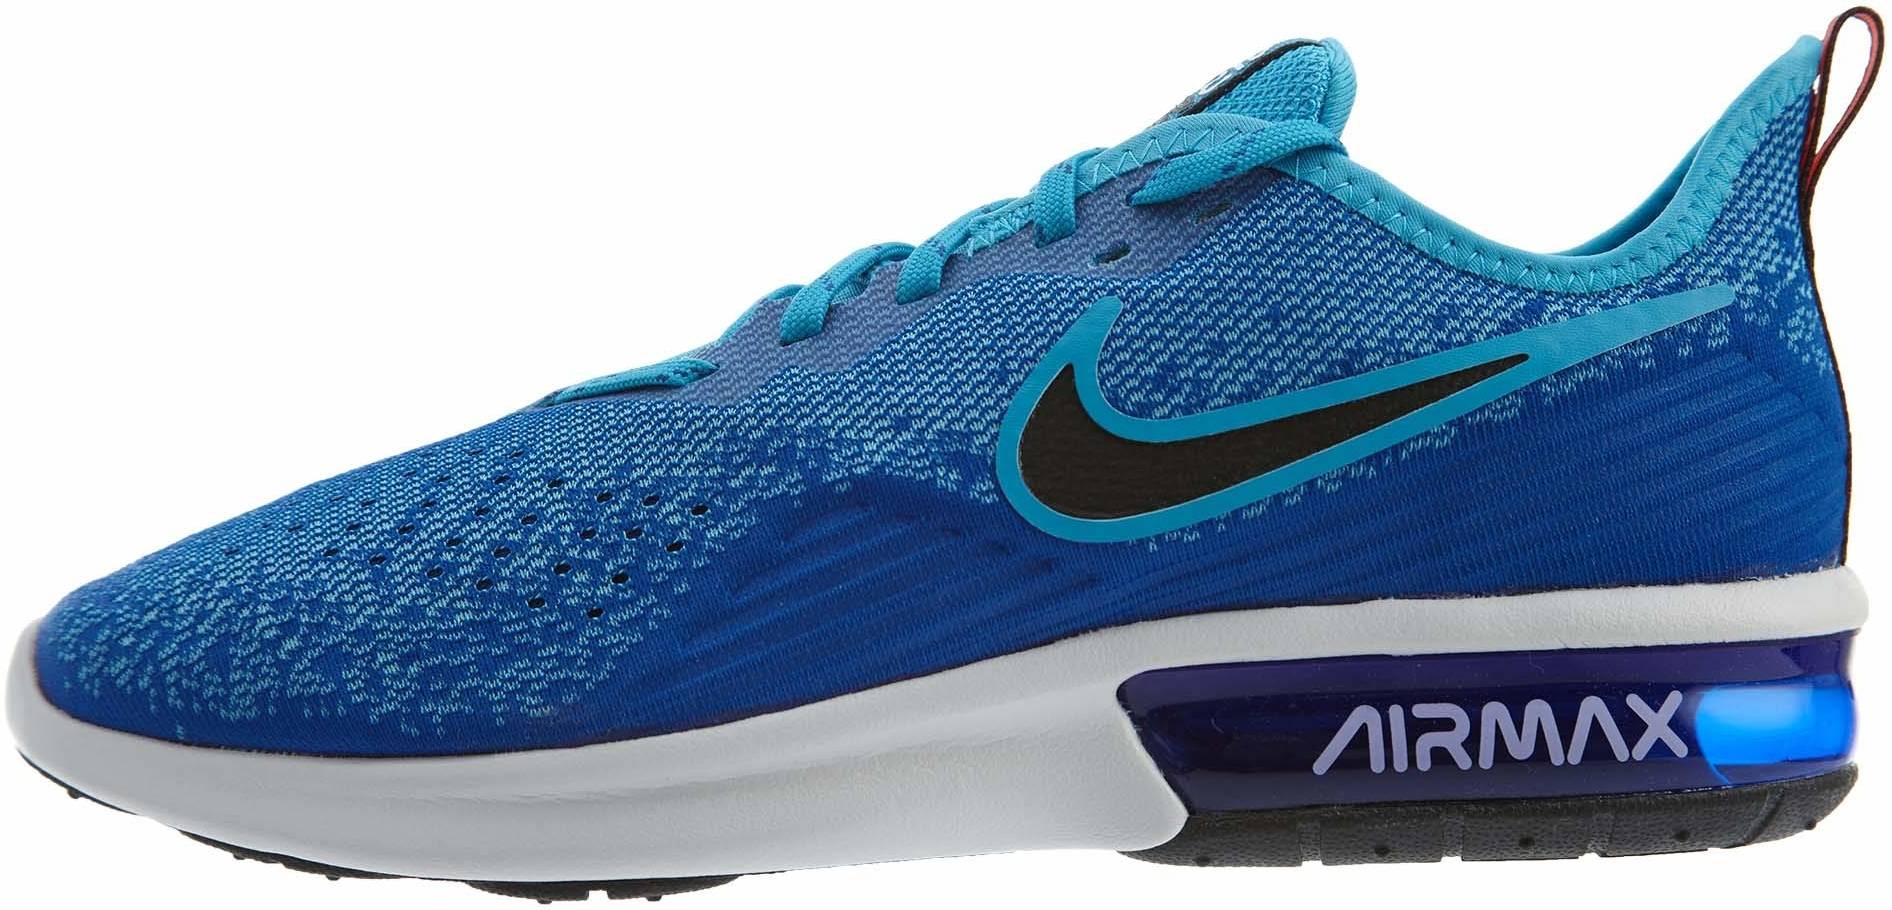 Nike Air Max Sequent 4 Running Shoes Online Shop, UP TO 70% OFF